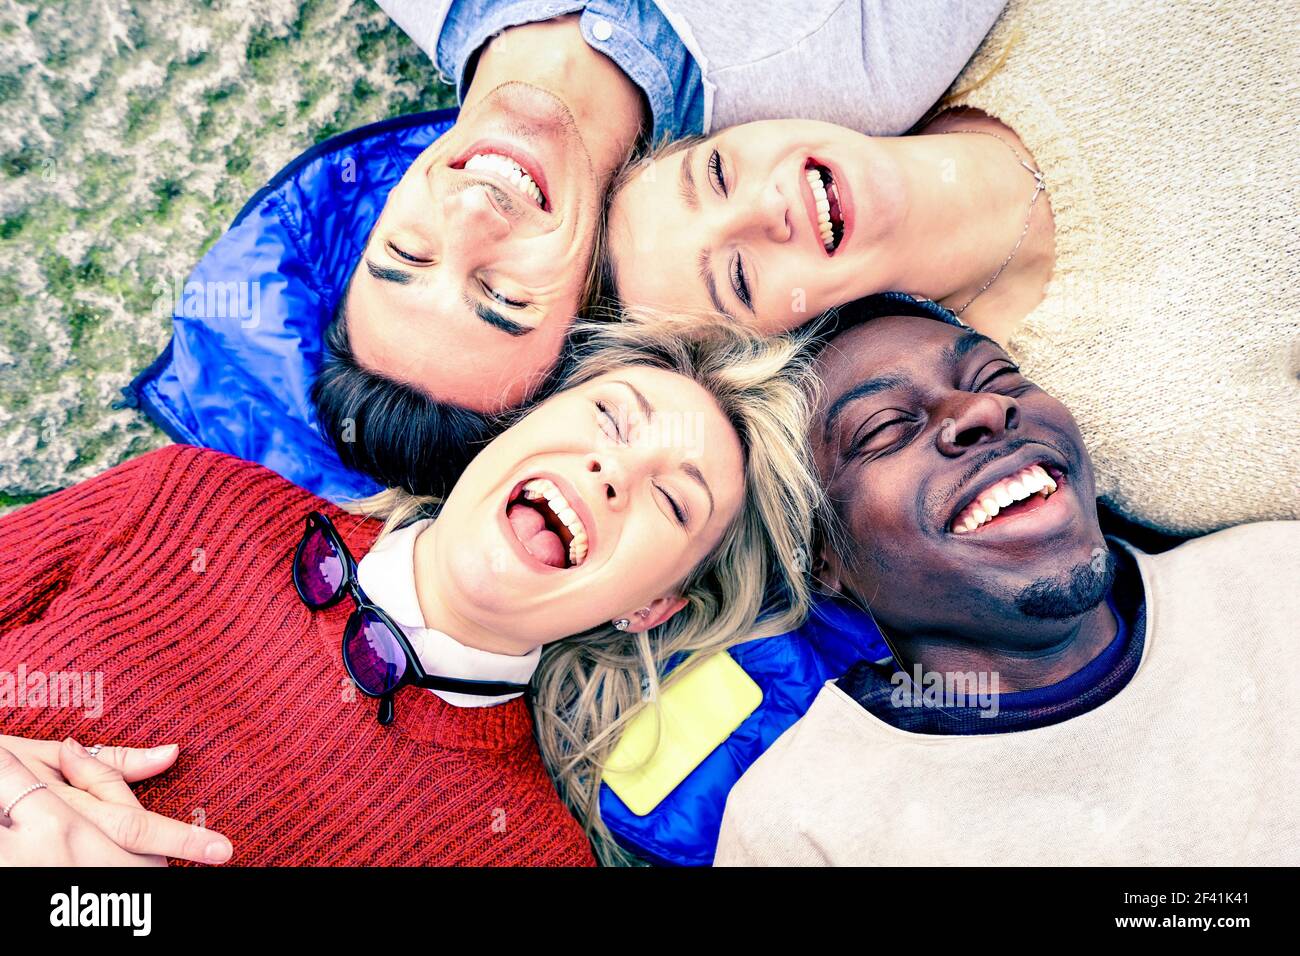 Multiracial best friends having fun and laughing together outdoor at springtime - Happy friendship concept with young people on fashion clothes Stock Photo